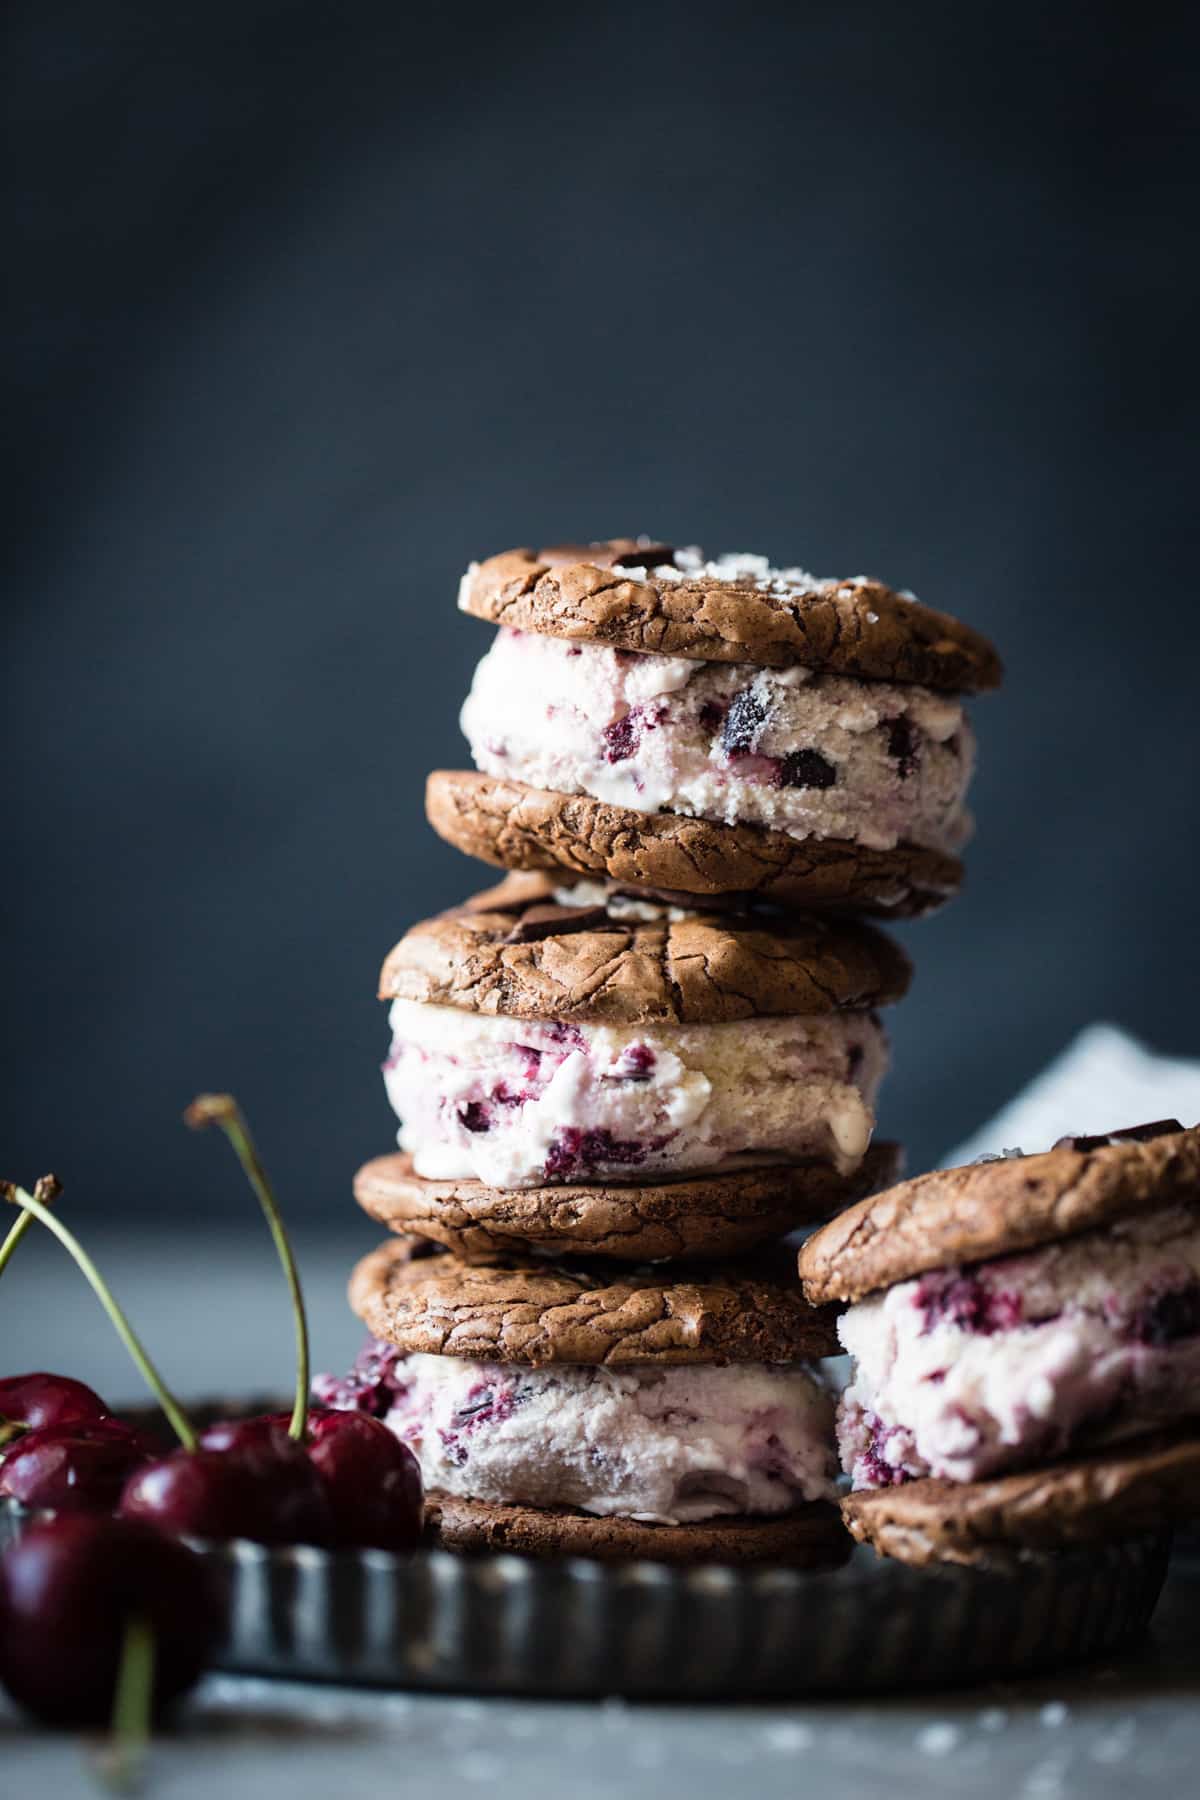 stacked Roasted Cherry Ice Cream Sandwiches with Salted Double Chocolate Buckwheat Cookies {gluten-free}